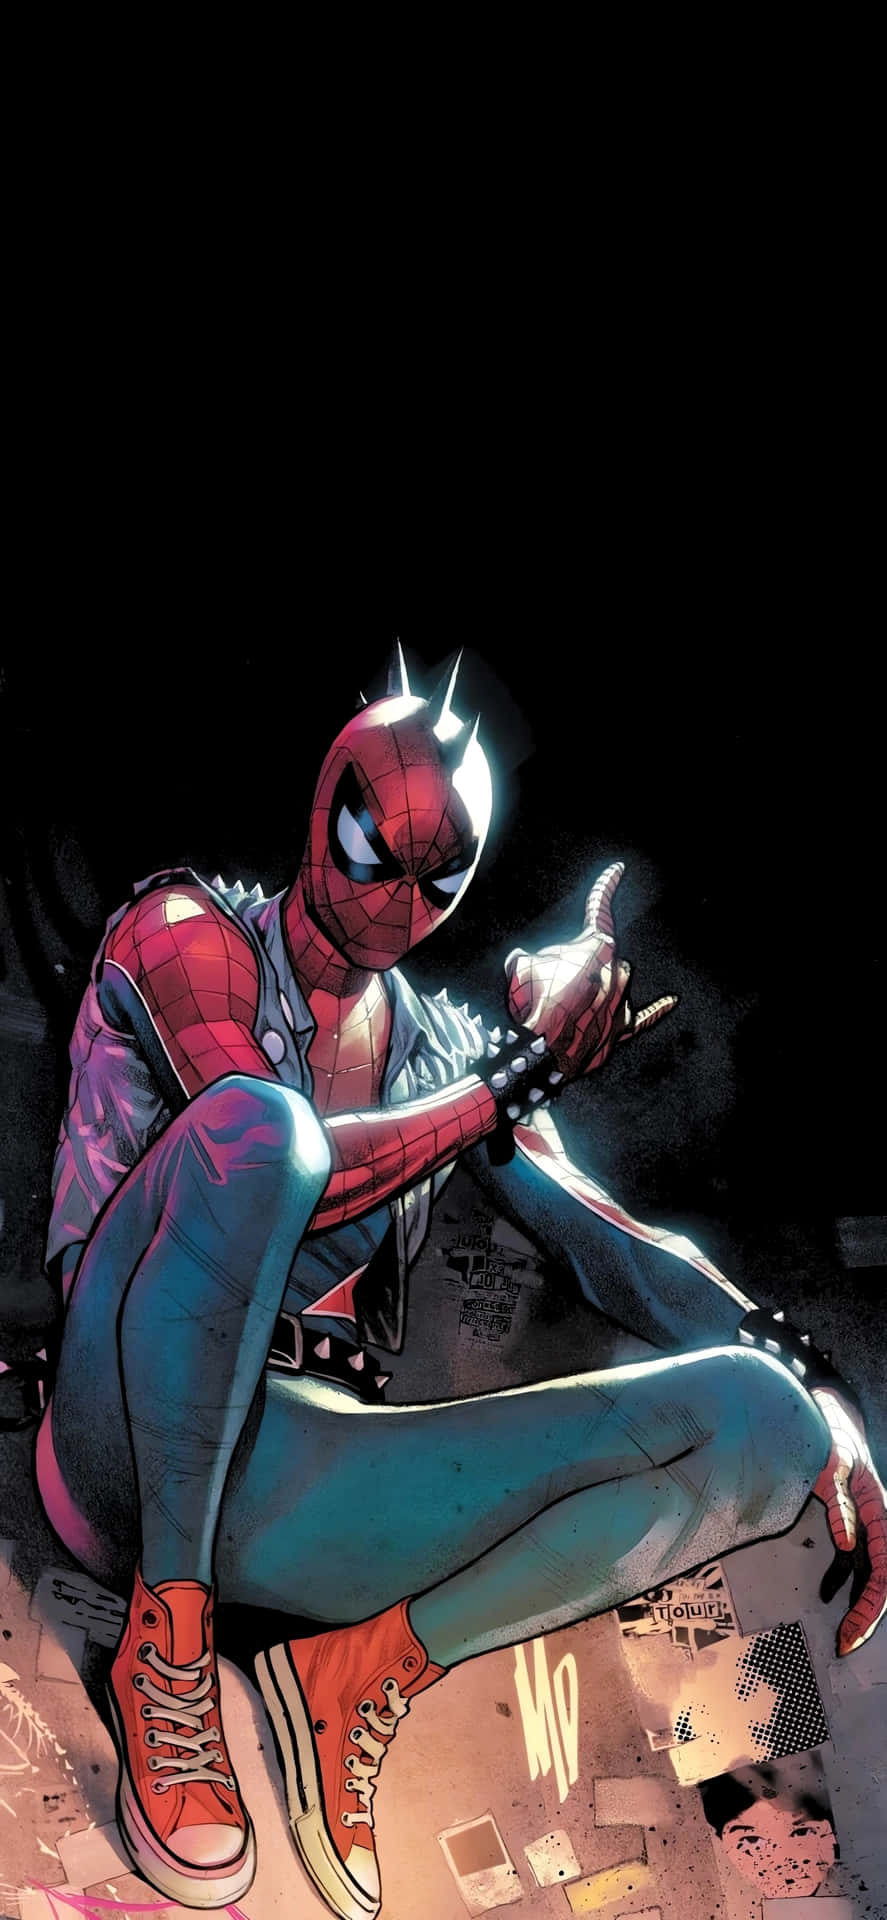 Spider Punk Sitting With Guitar Wallpaper